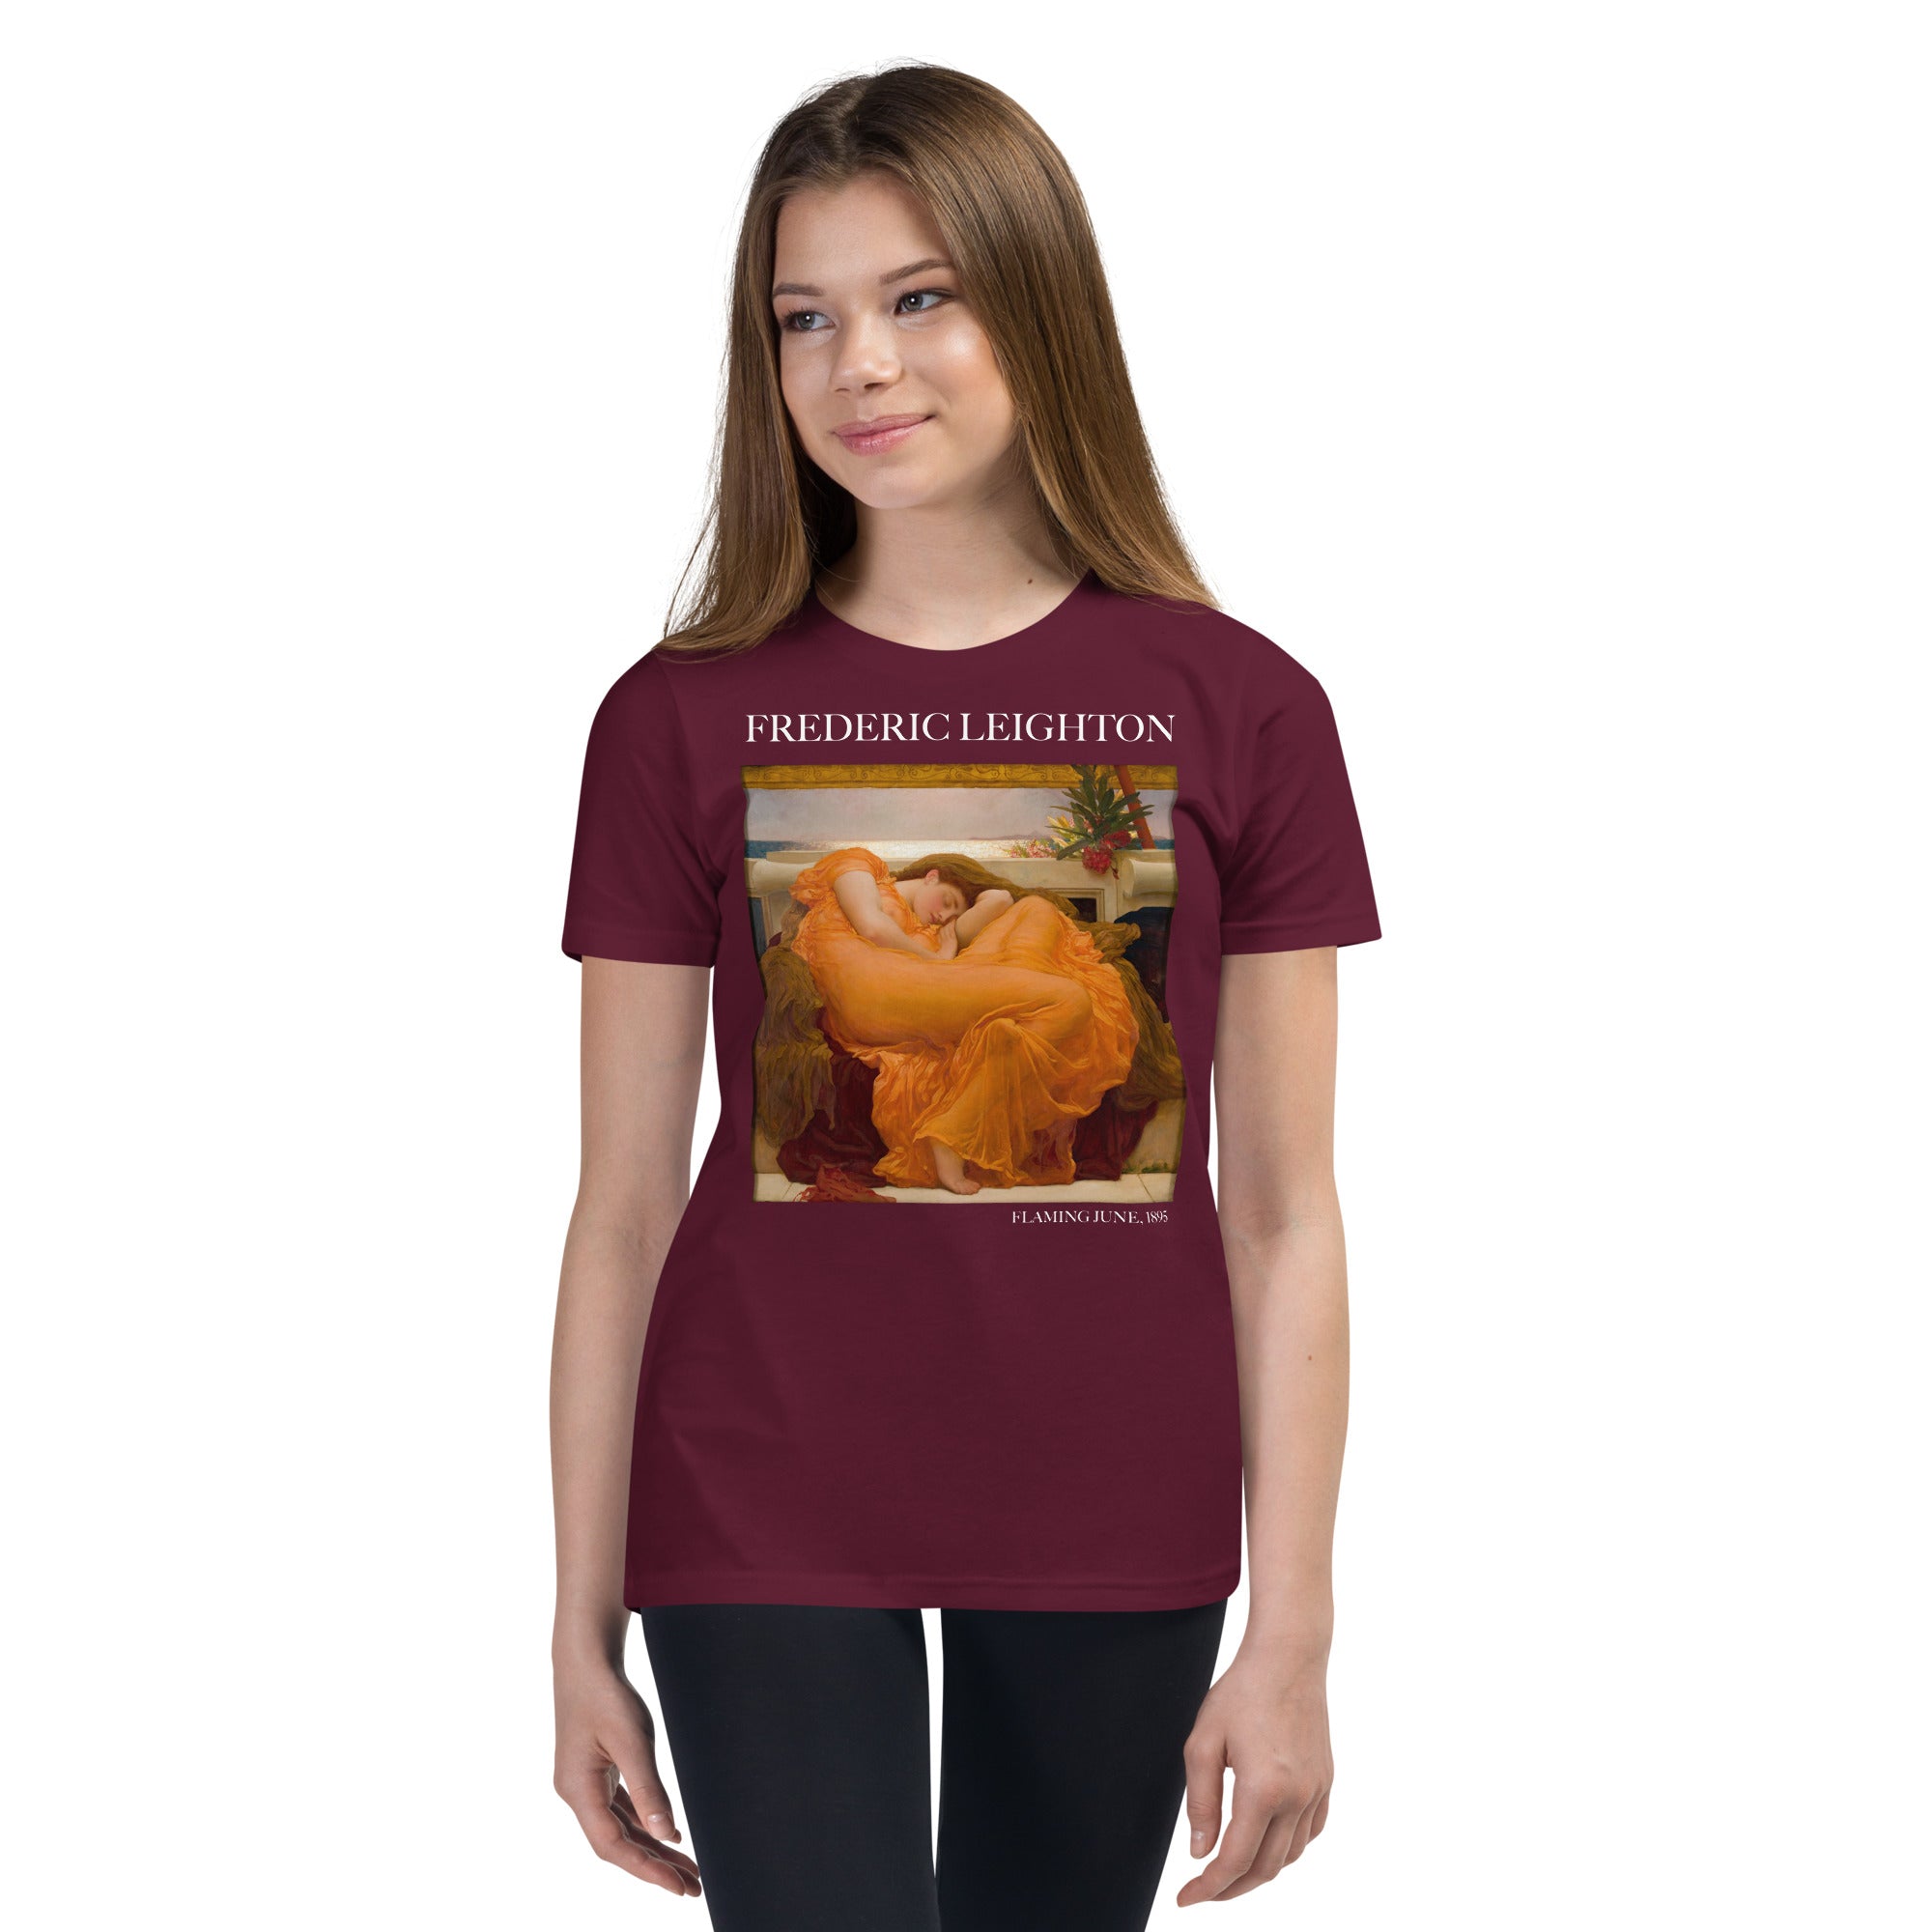 Frederic Leighton 'Flaming June' Famous Painting Short Sleeve T-Shirt | Premium Youth Art Tee